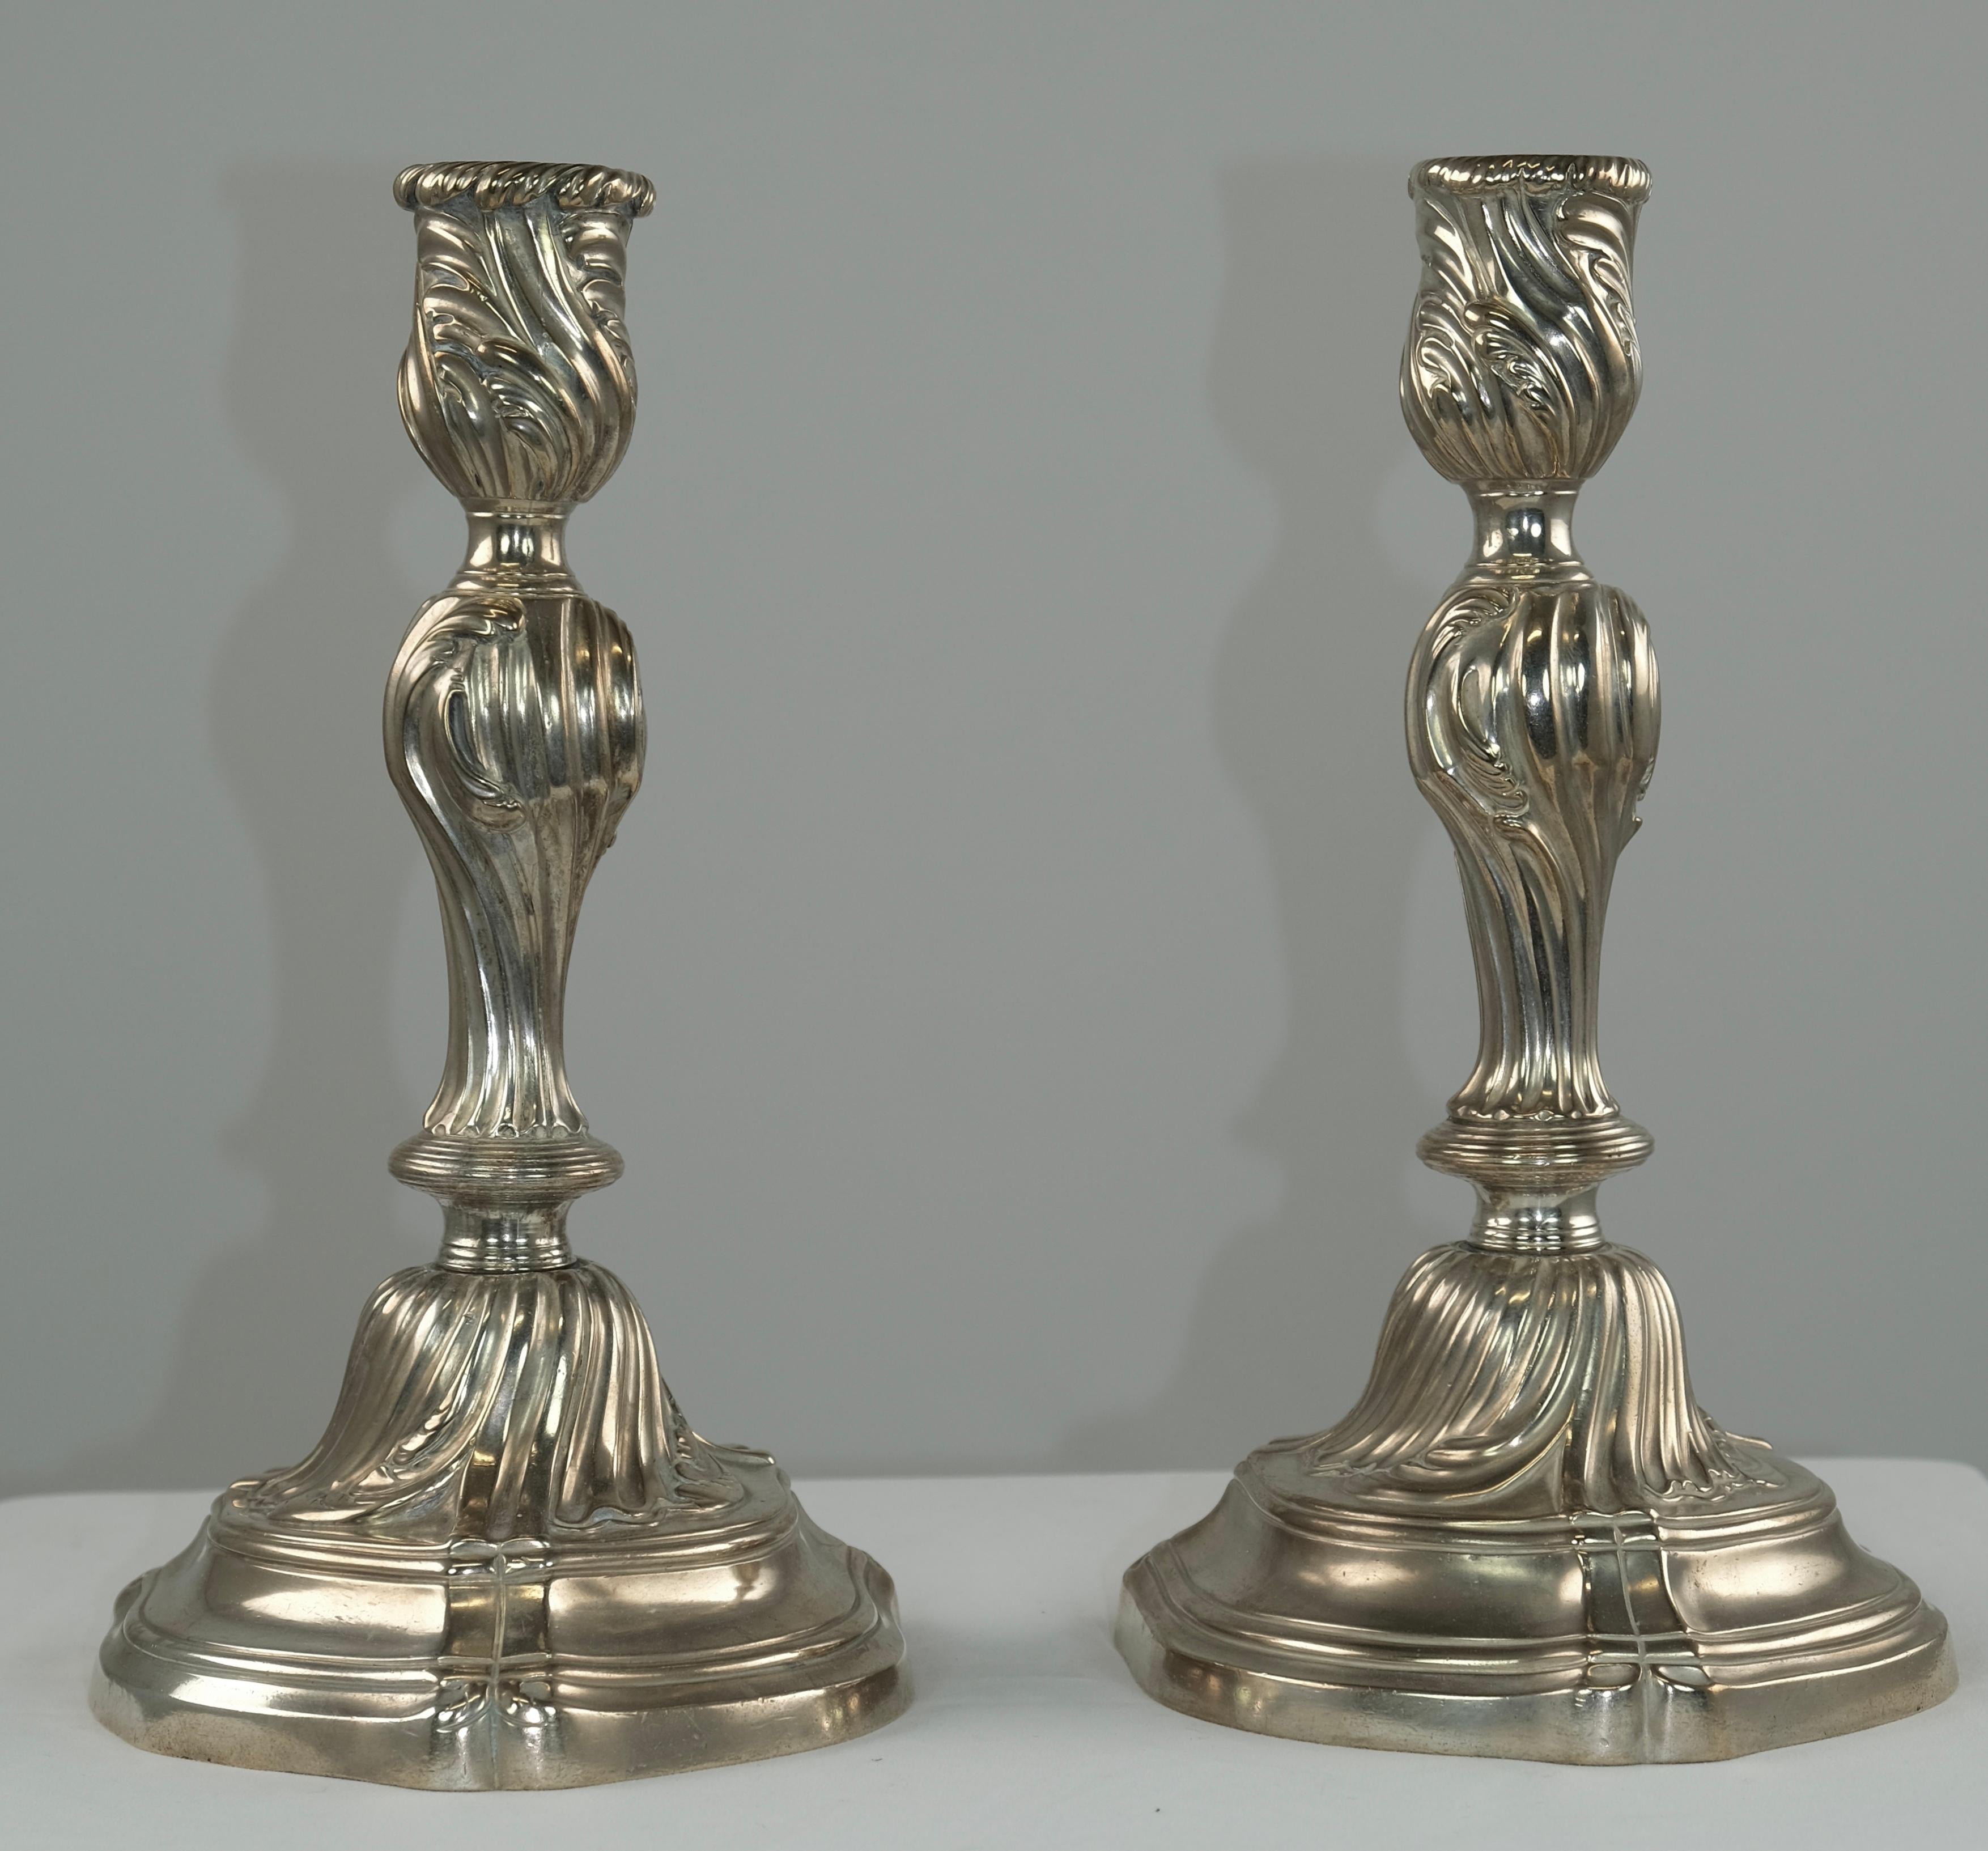 European Pair of silvered bronce Rococo Candlesticks, 18th Century